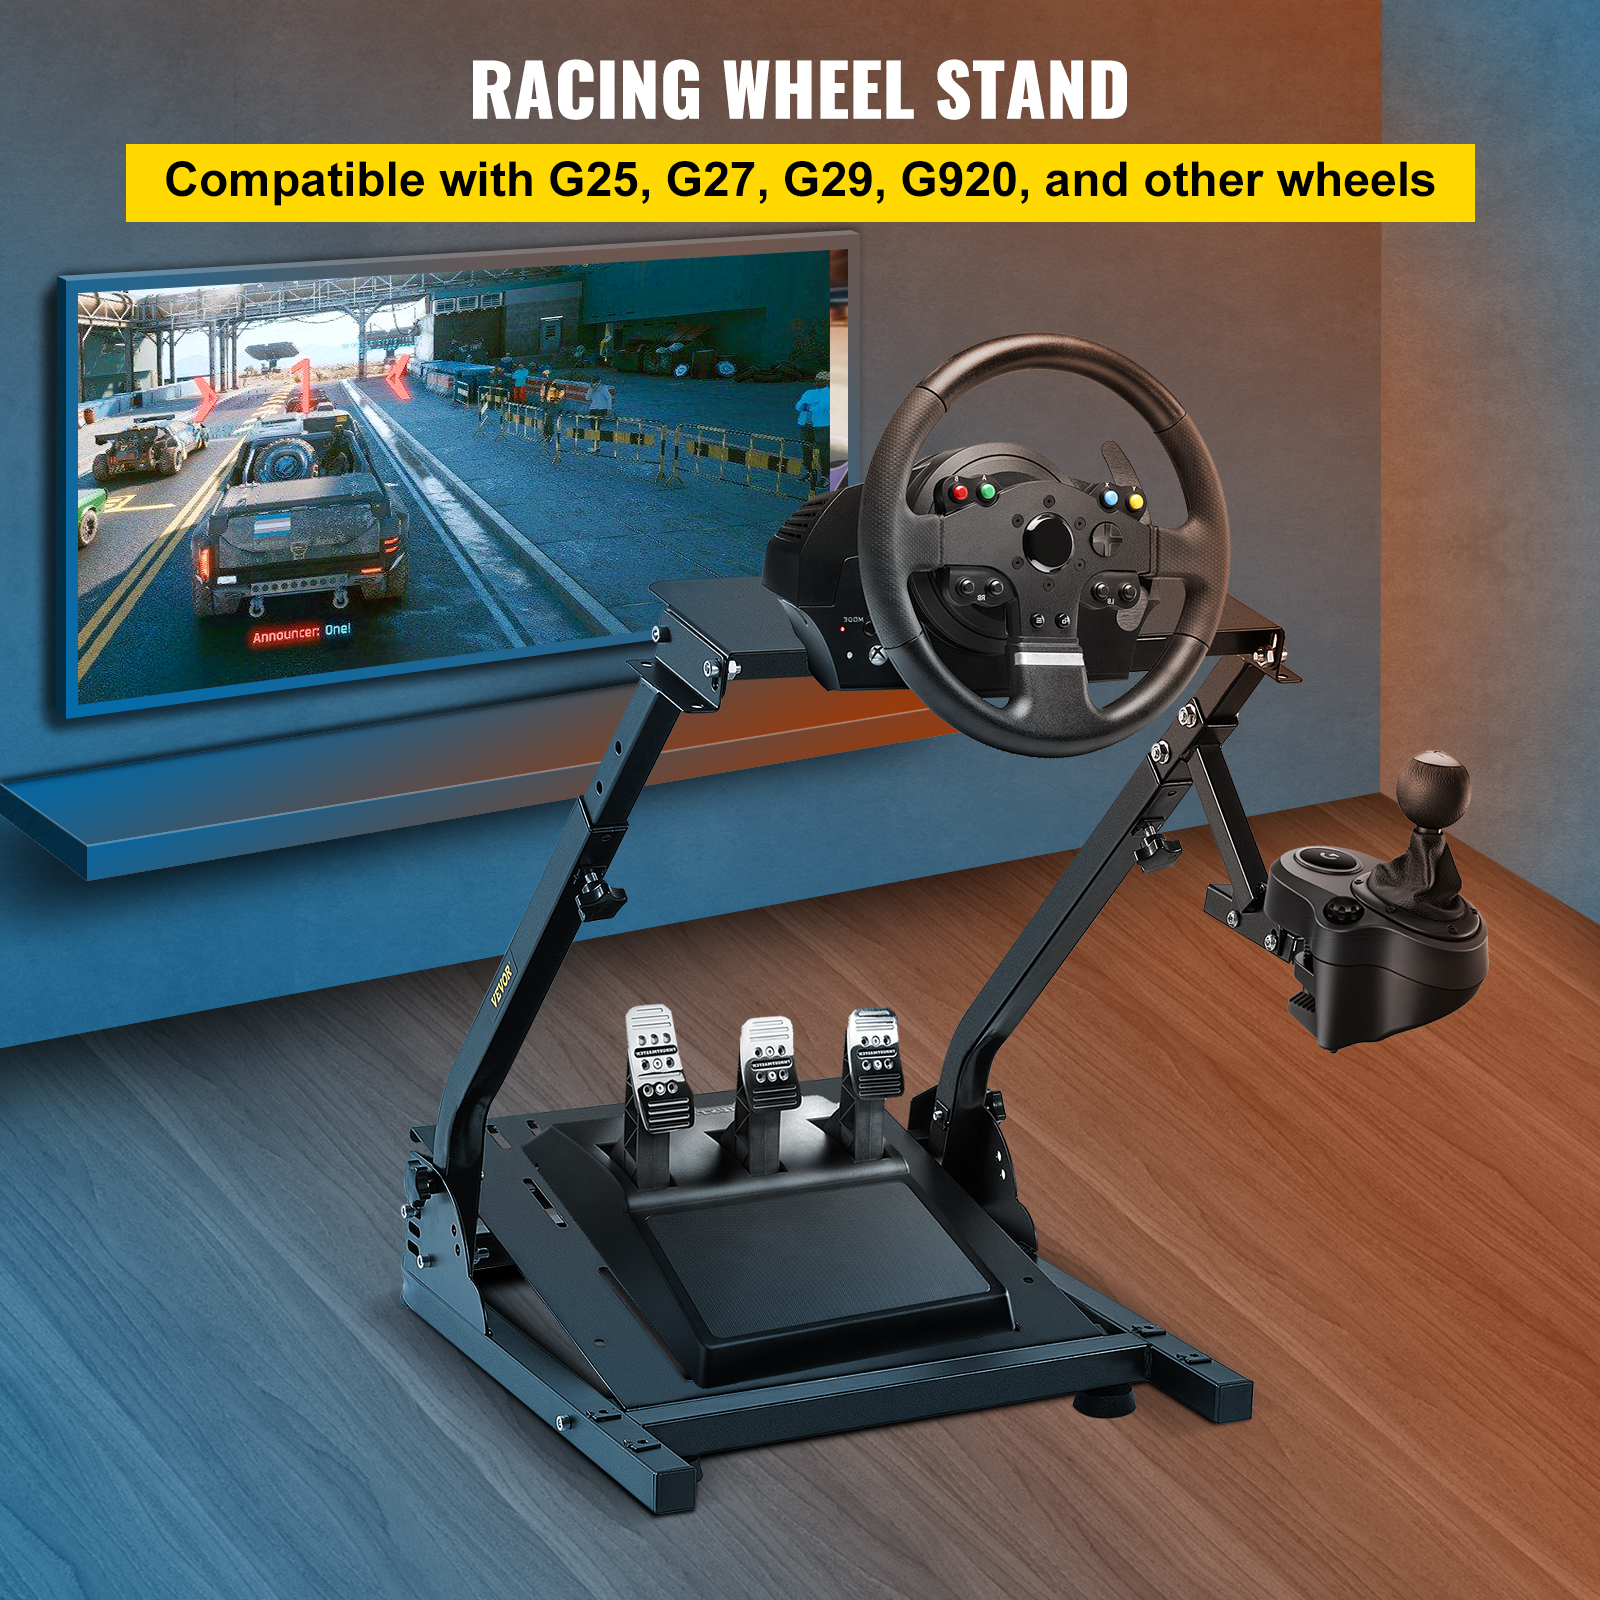 VEVOR VEVOR Racing Wheel Stand Cockpit Black Fits for All Logitech G29/G920  All Thrustmaster All Fanatec Wheels Compatible with Xbox One, Playstation,  PC Platforms